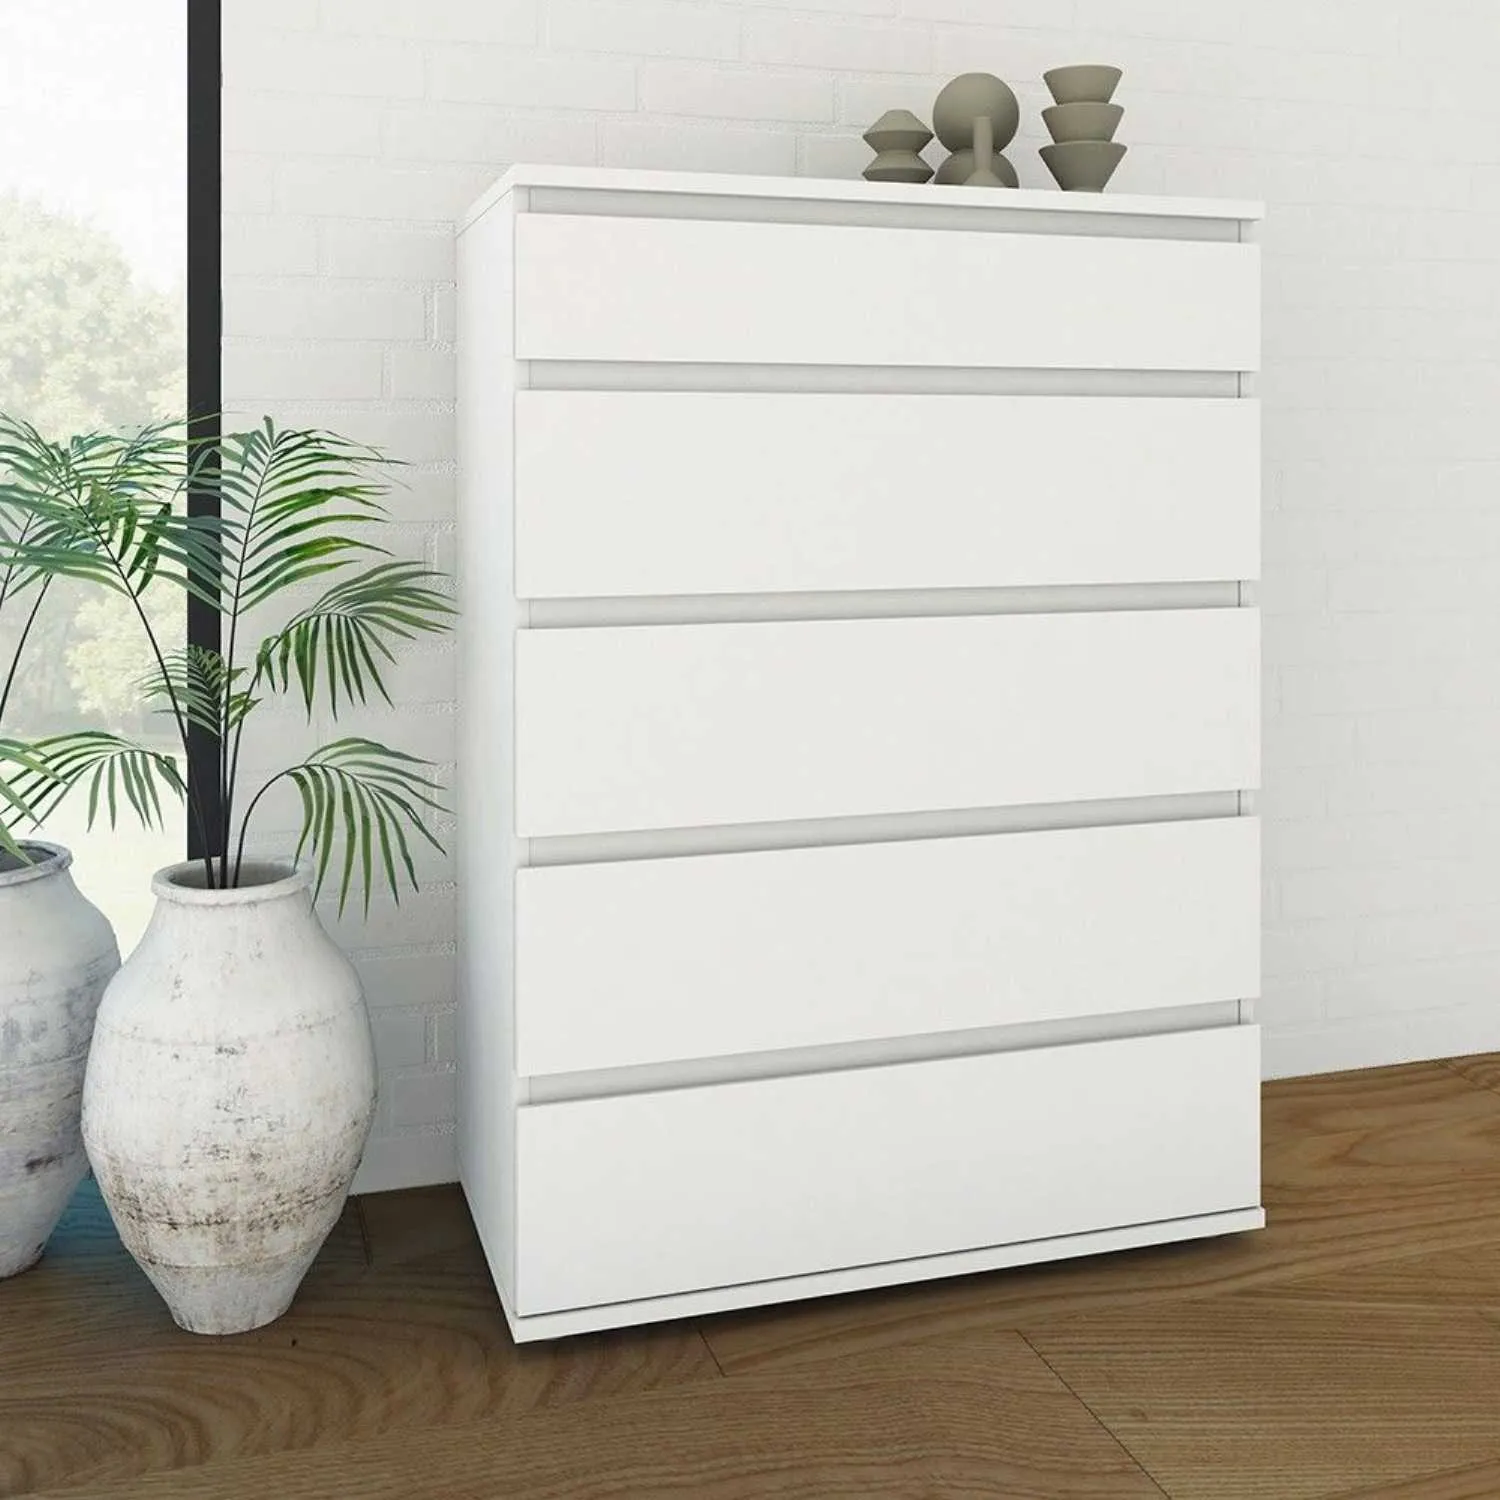 Simple White Chest of 5 Drawers No Handles 77cm Wide